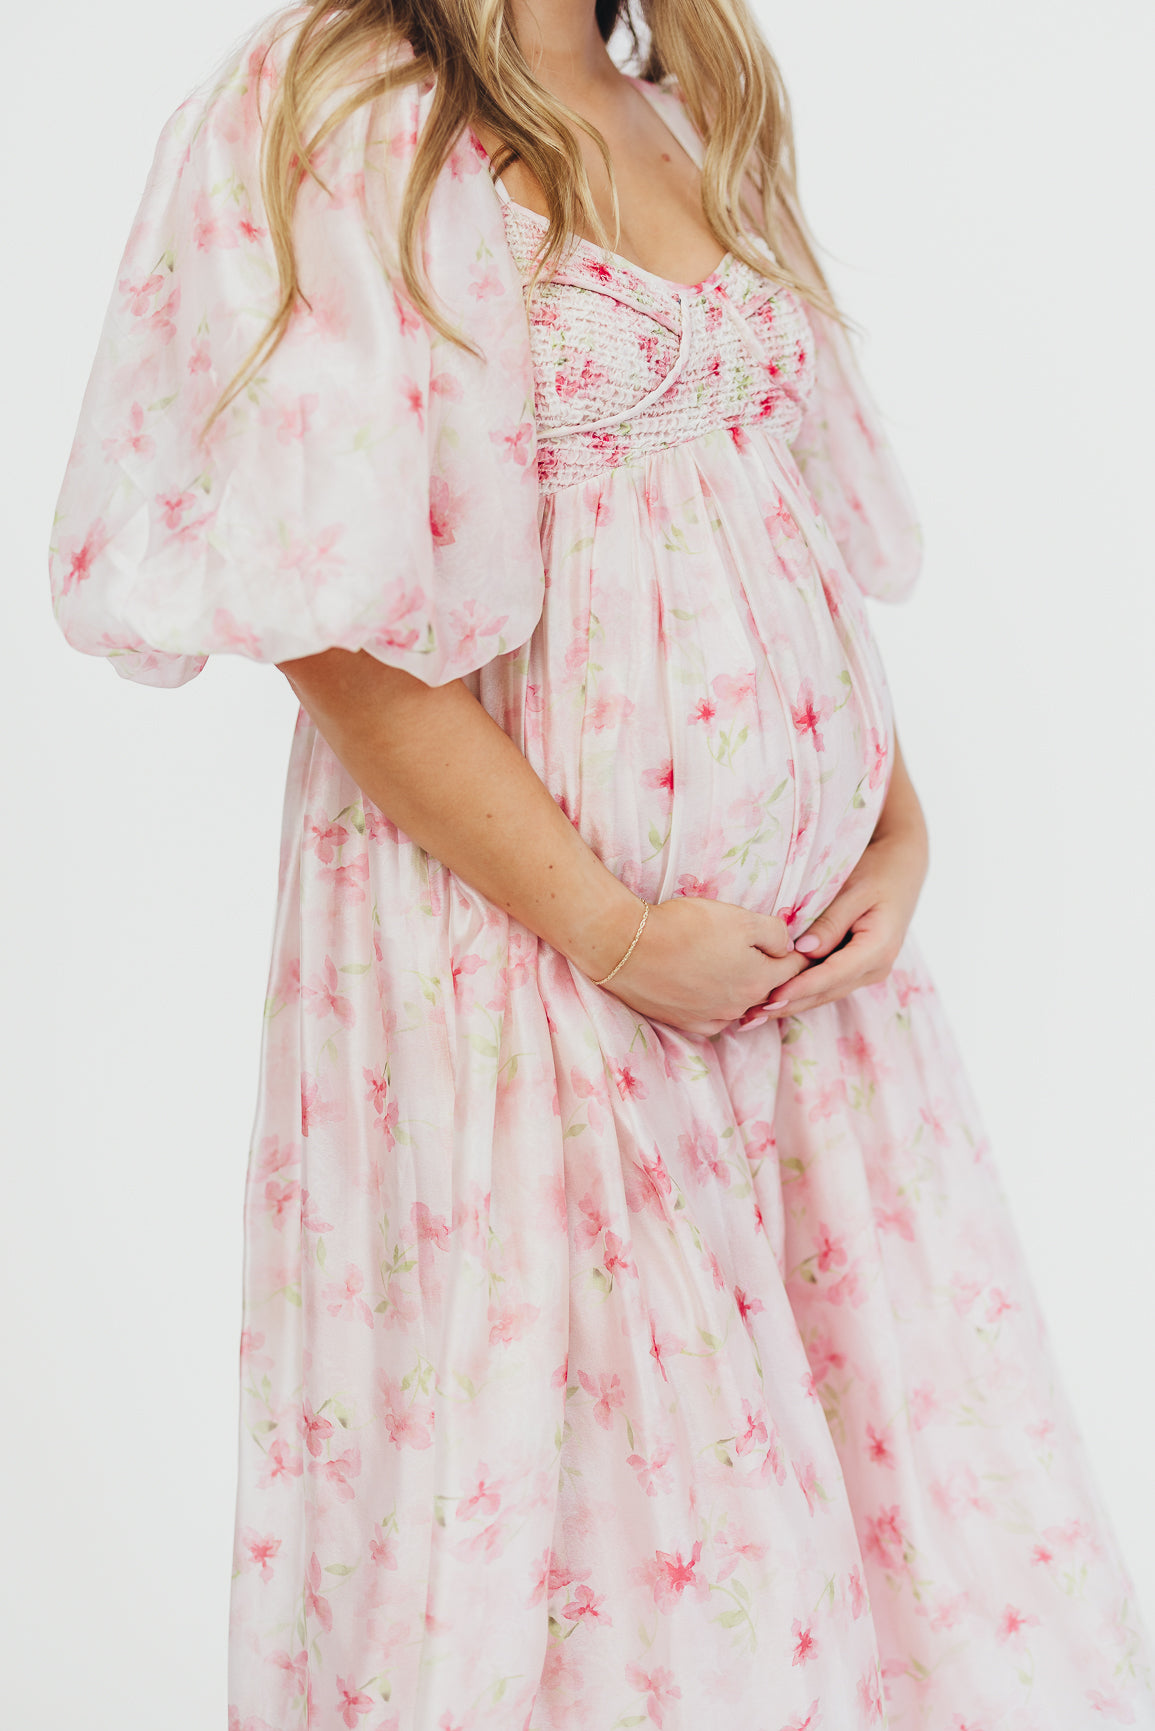 Harlow Maxi Dress in Pink - Bump Friendly & Inclusive Sizing (S-3XL)